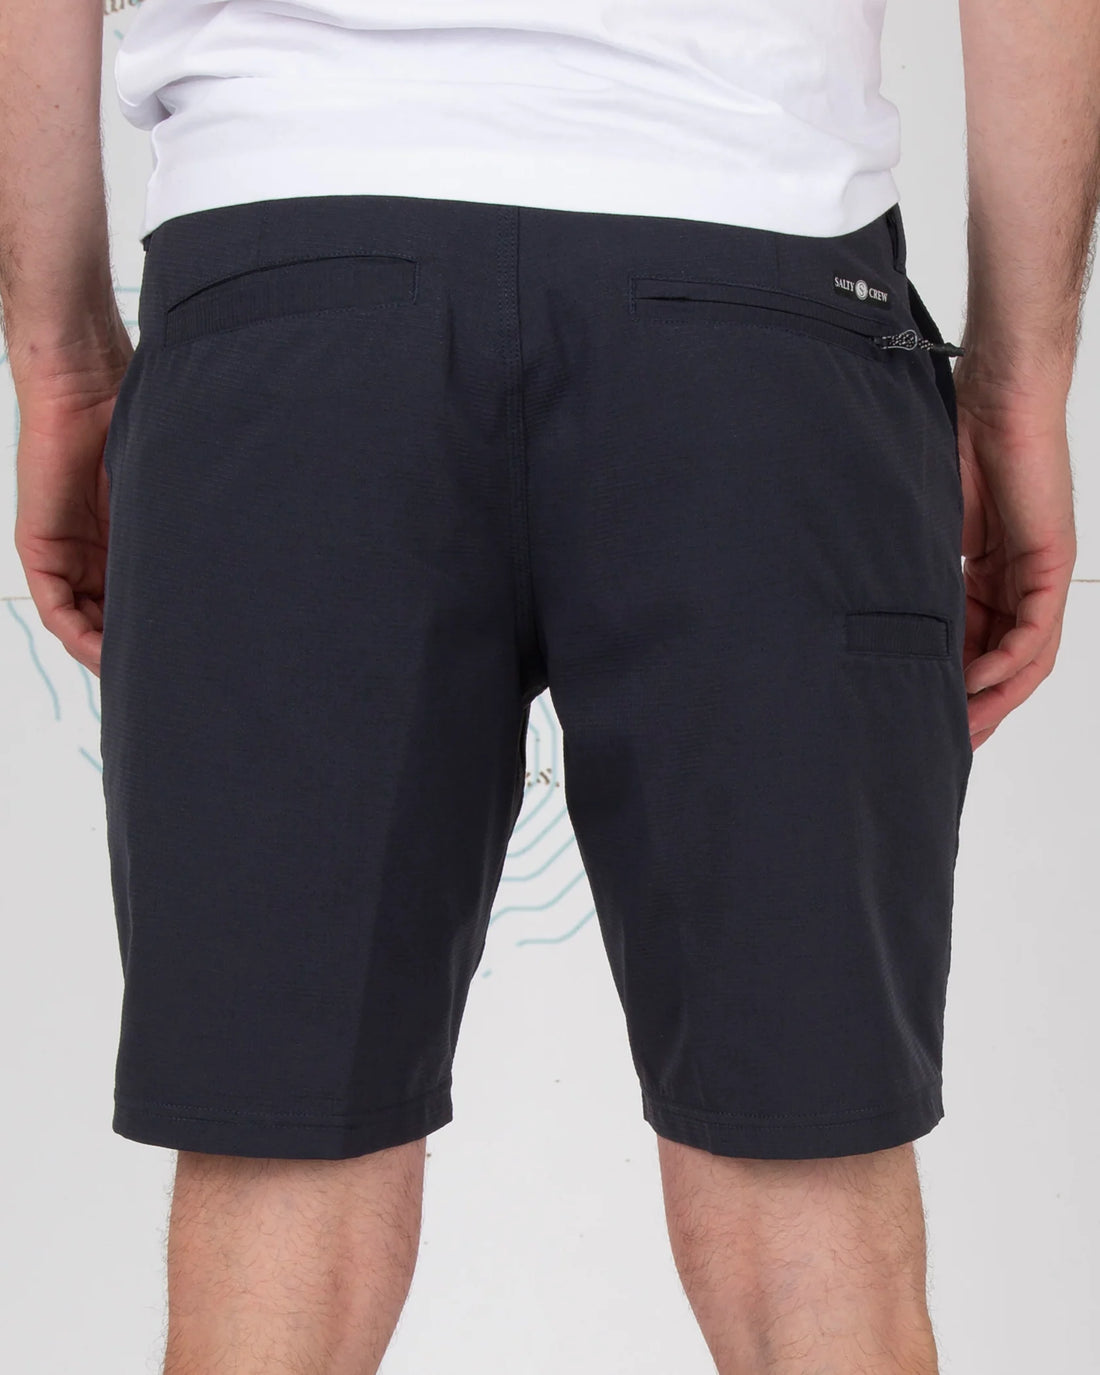 SALTY CREW DRIFTER 2 PERFORATED HYBRID - TRUE NAVY SHORTS SALTY CREW   